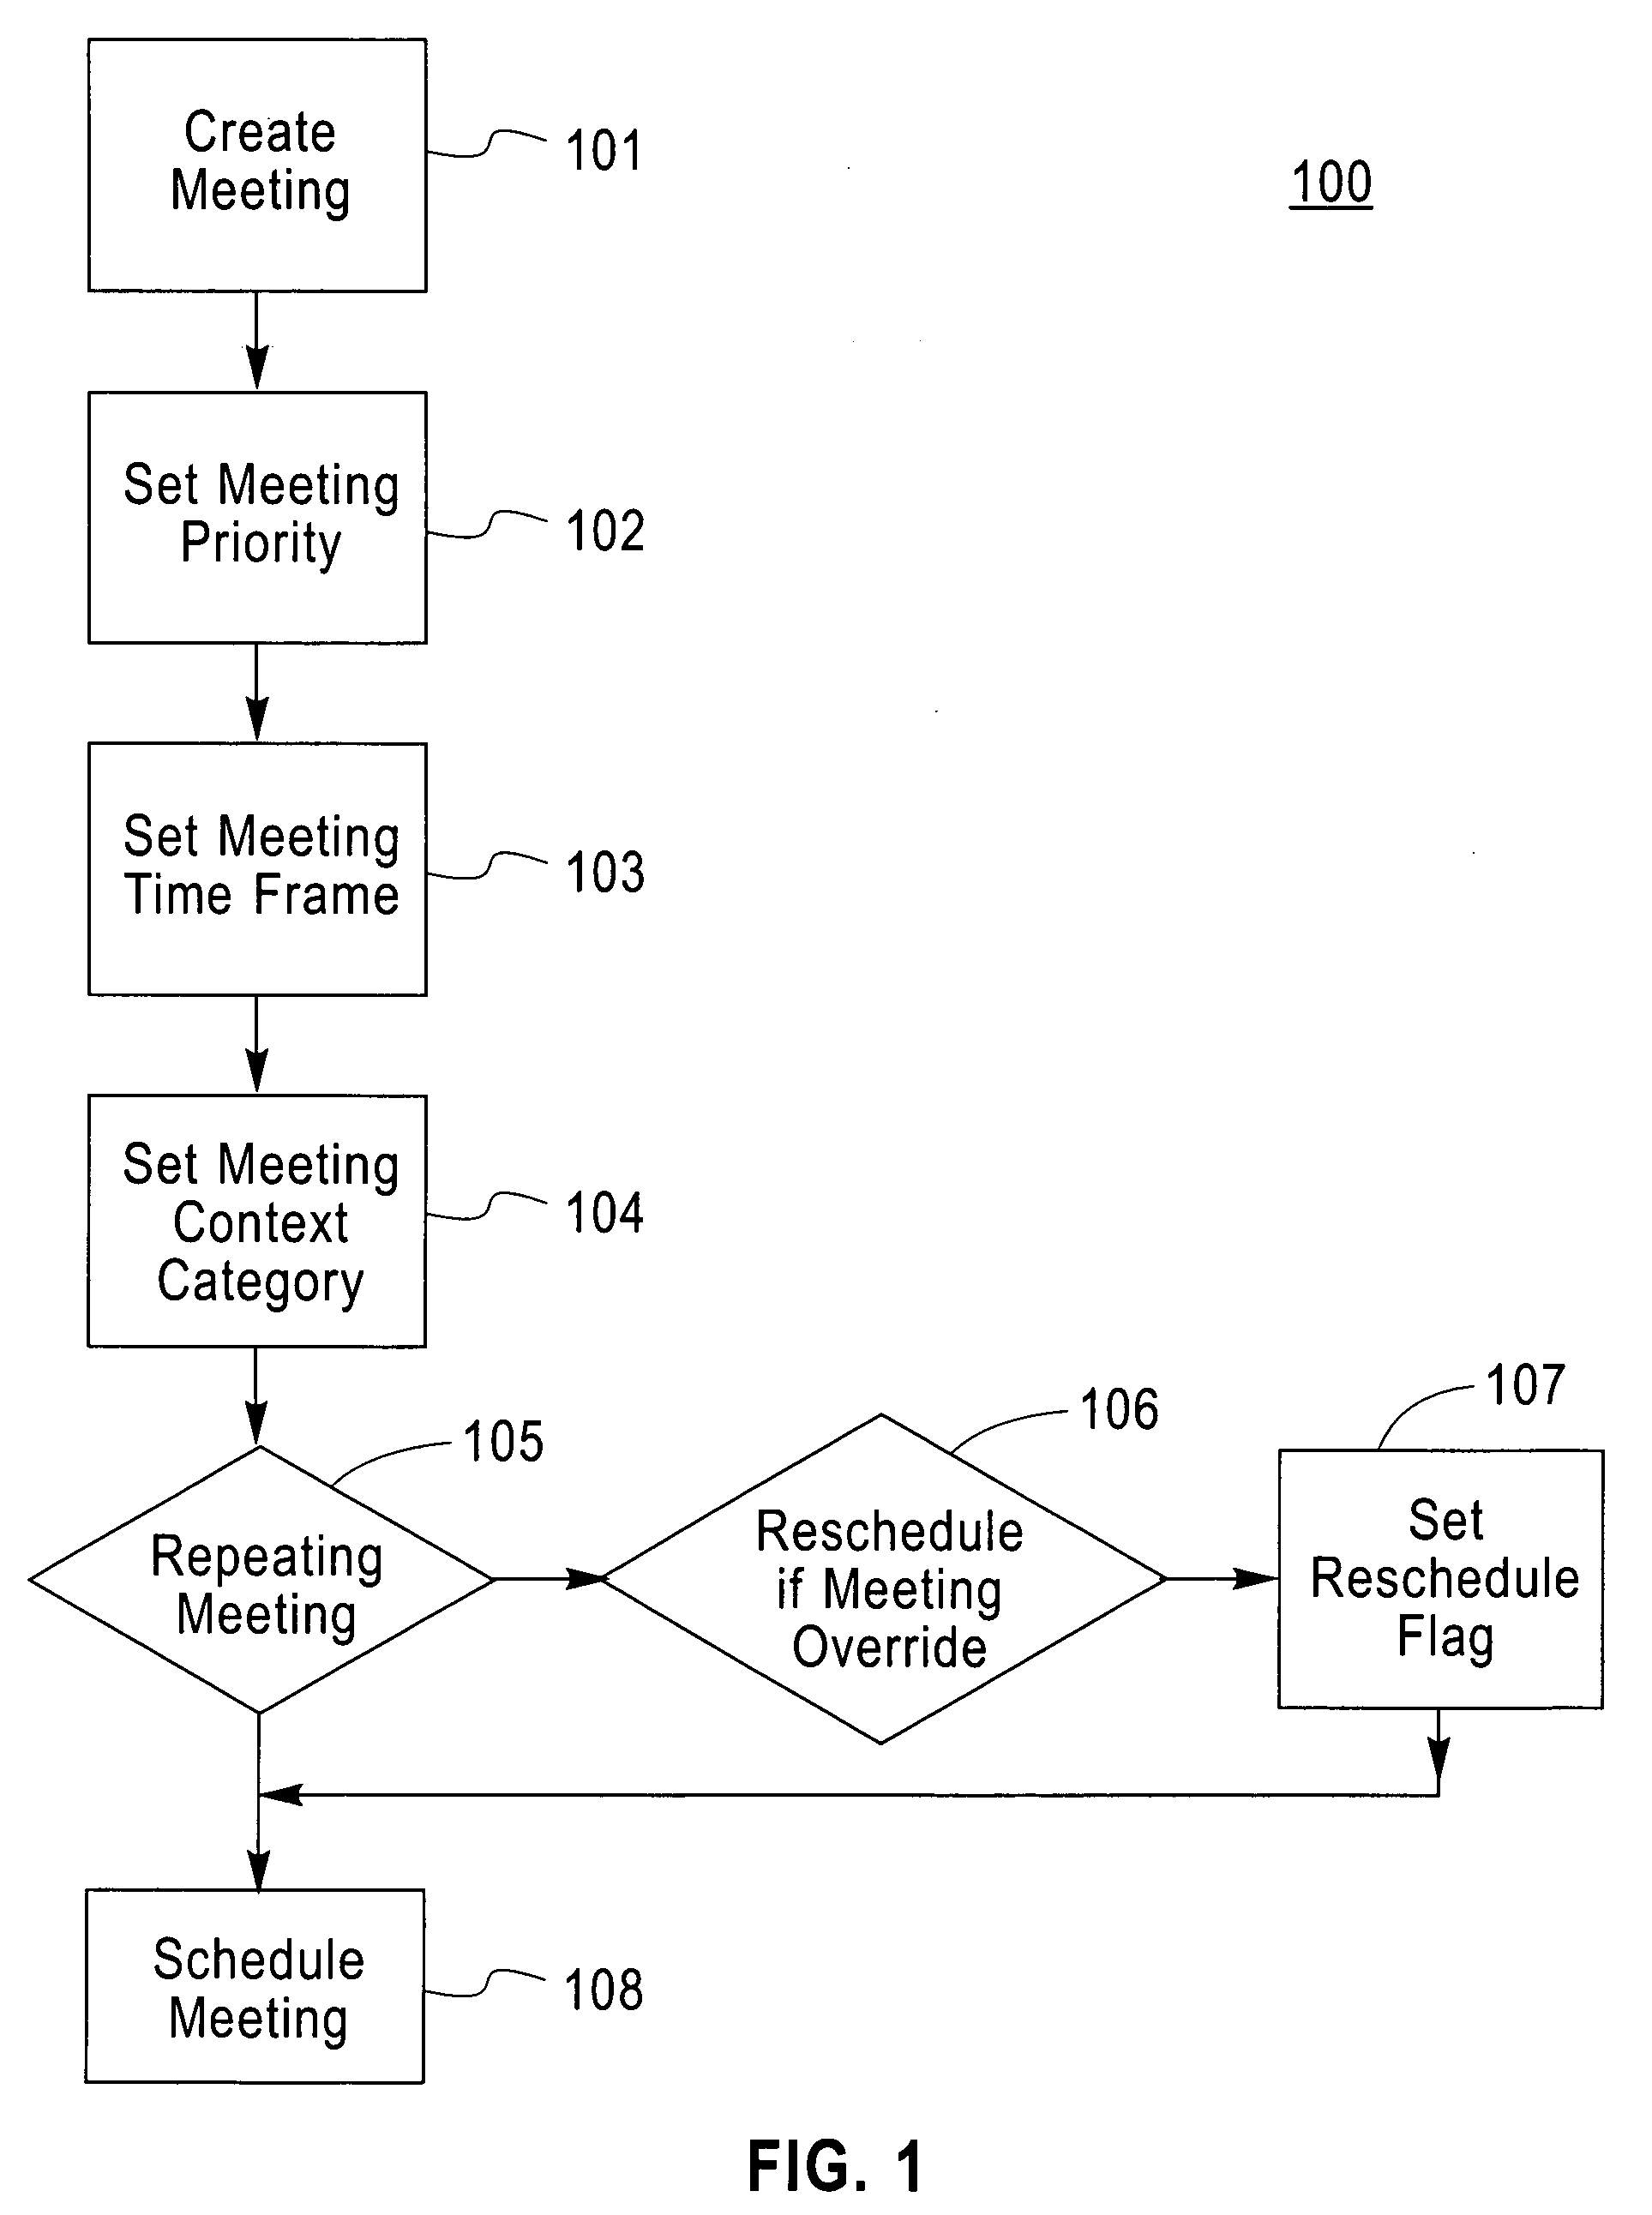 Method and structure for overriding calendar entries based on context and business value